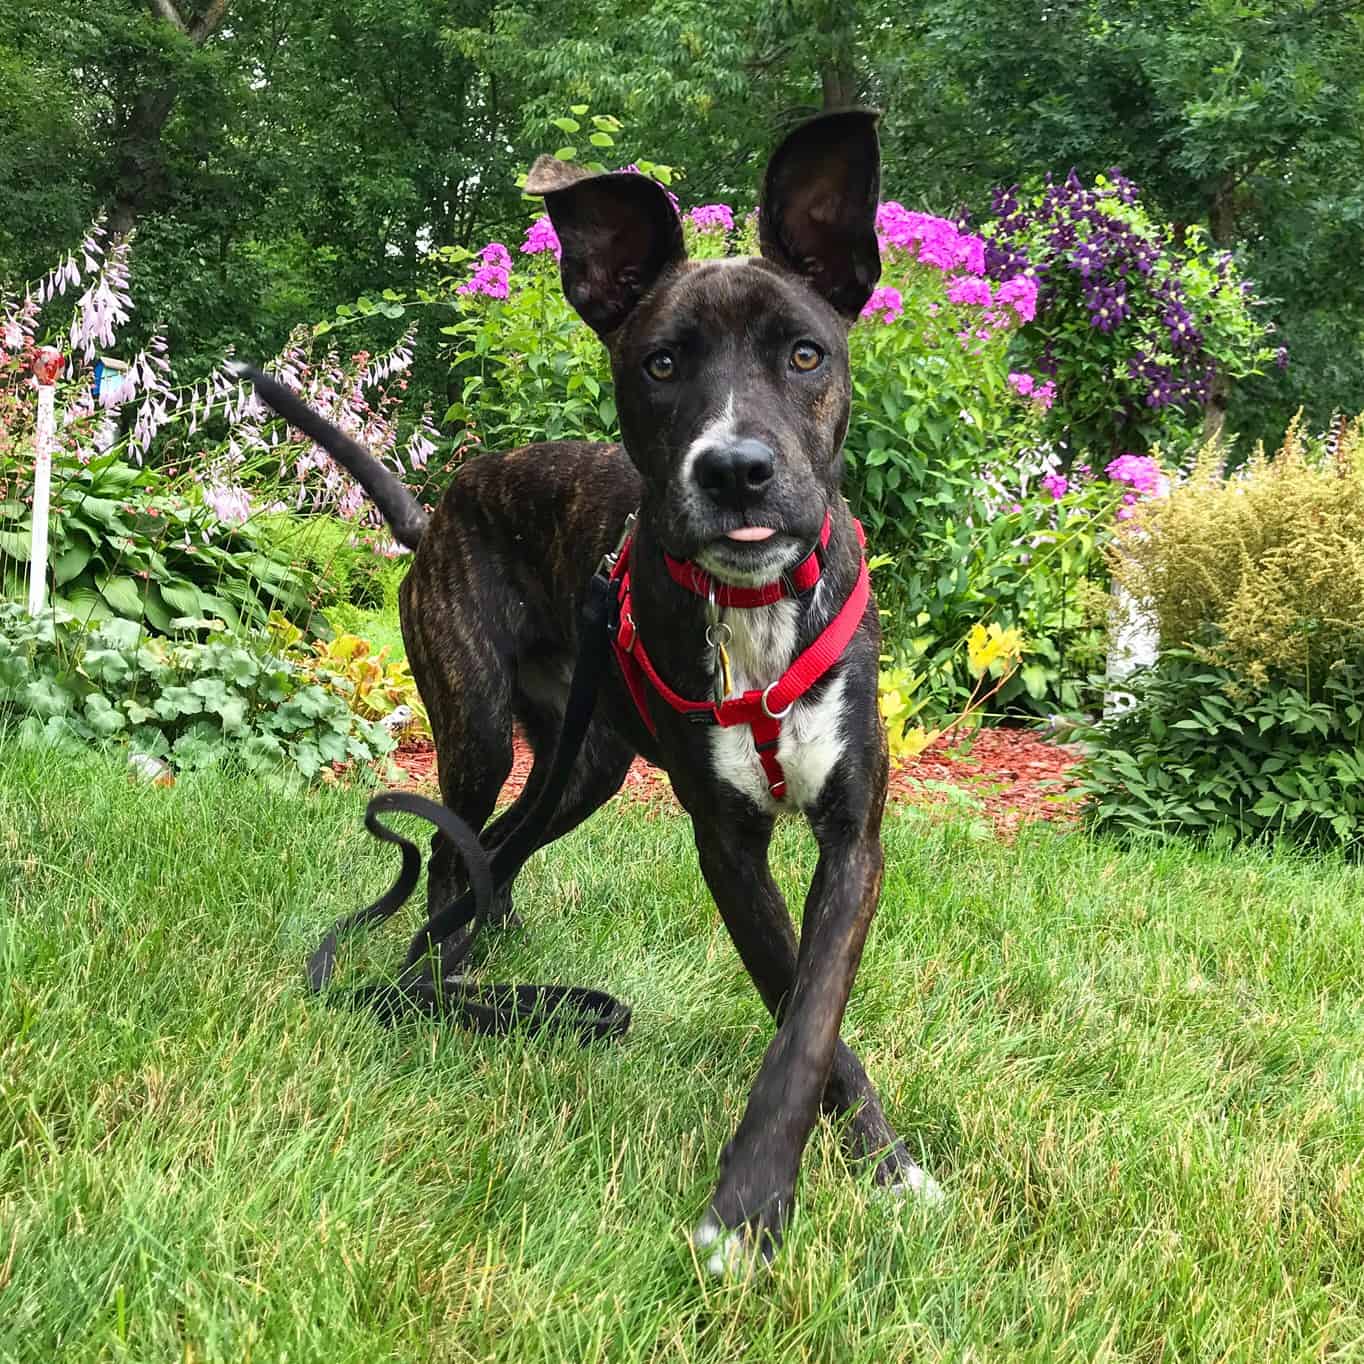 Brindle puppy in a red harness in front of a flower garden